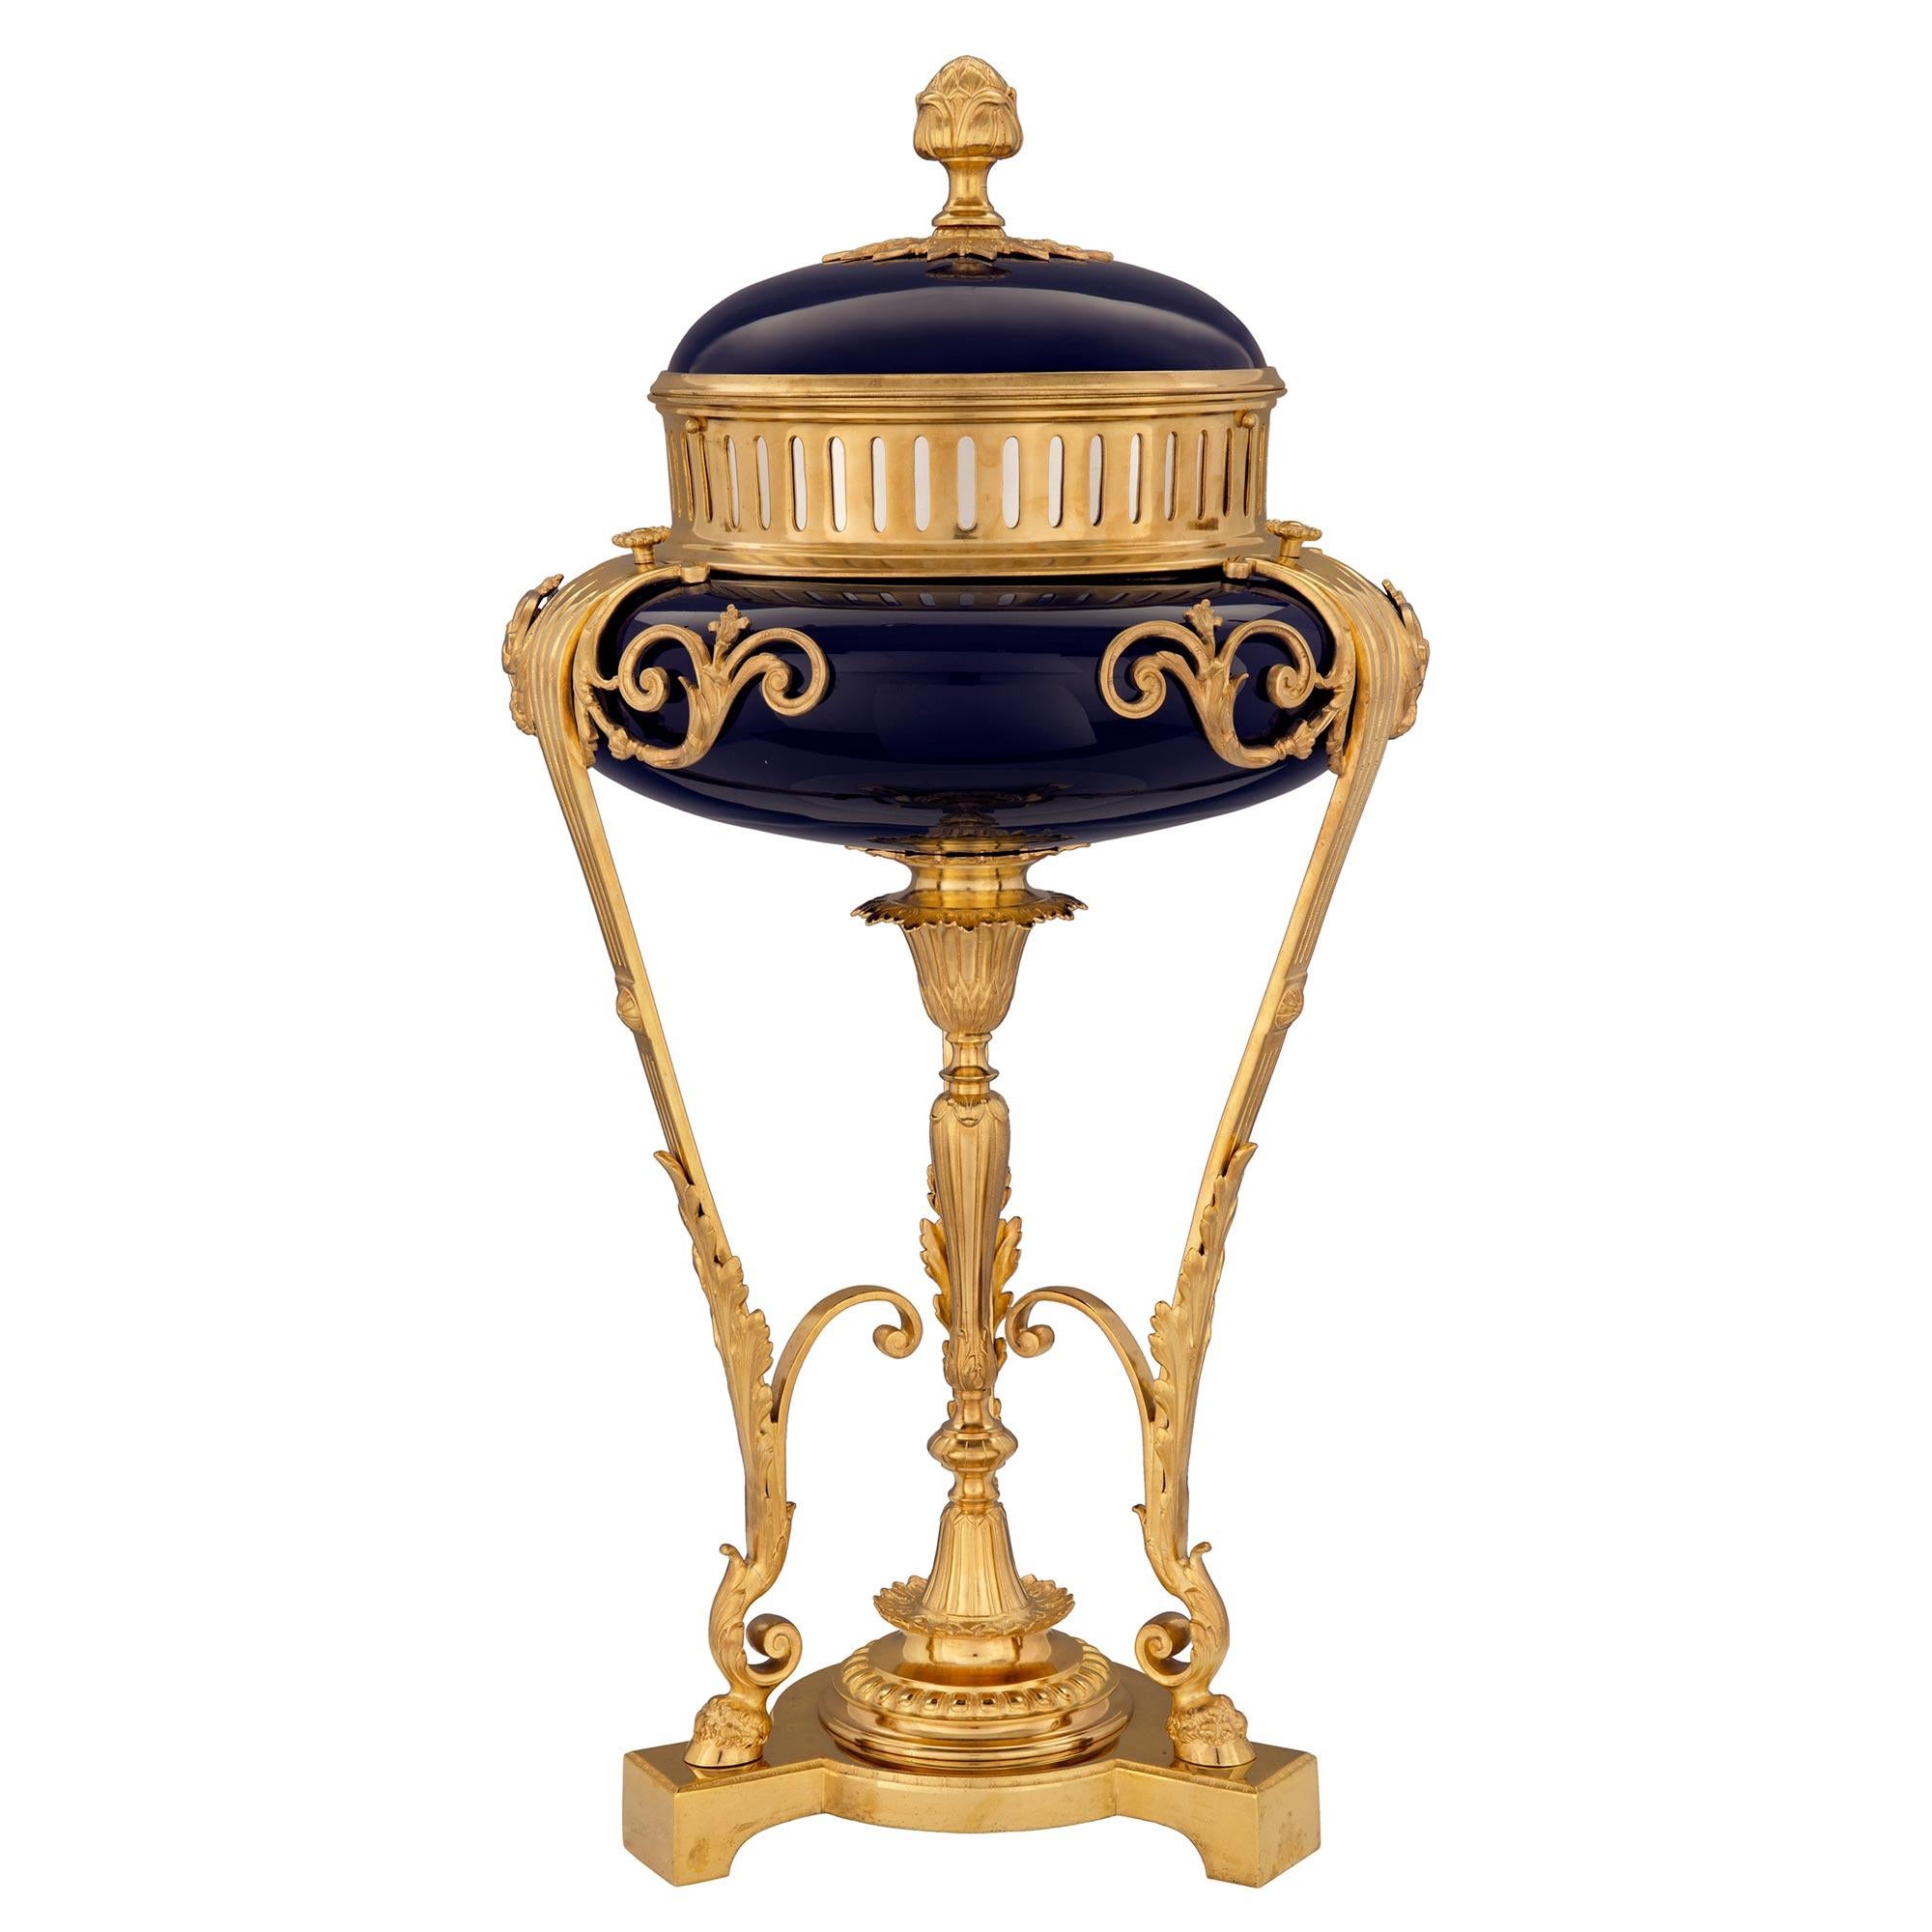 A superb French 19th Century Louis XVI st. cobalt blue Sèvres porcelain centerpiece. The centerpiece is modeled after a brule parfum and raised by a triangular base with three most elegant lightly curved legs with hoof feet and large richly chased